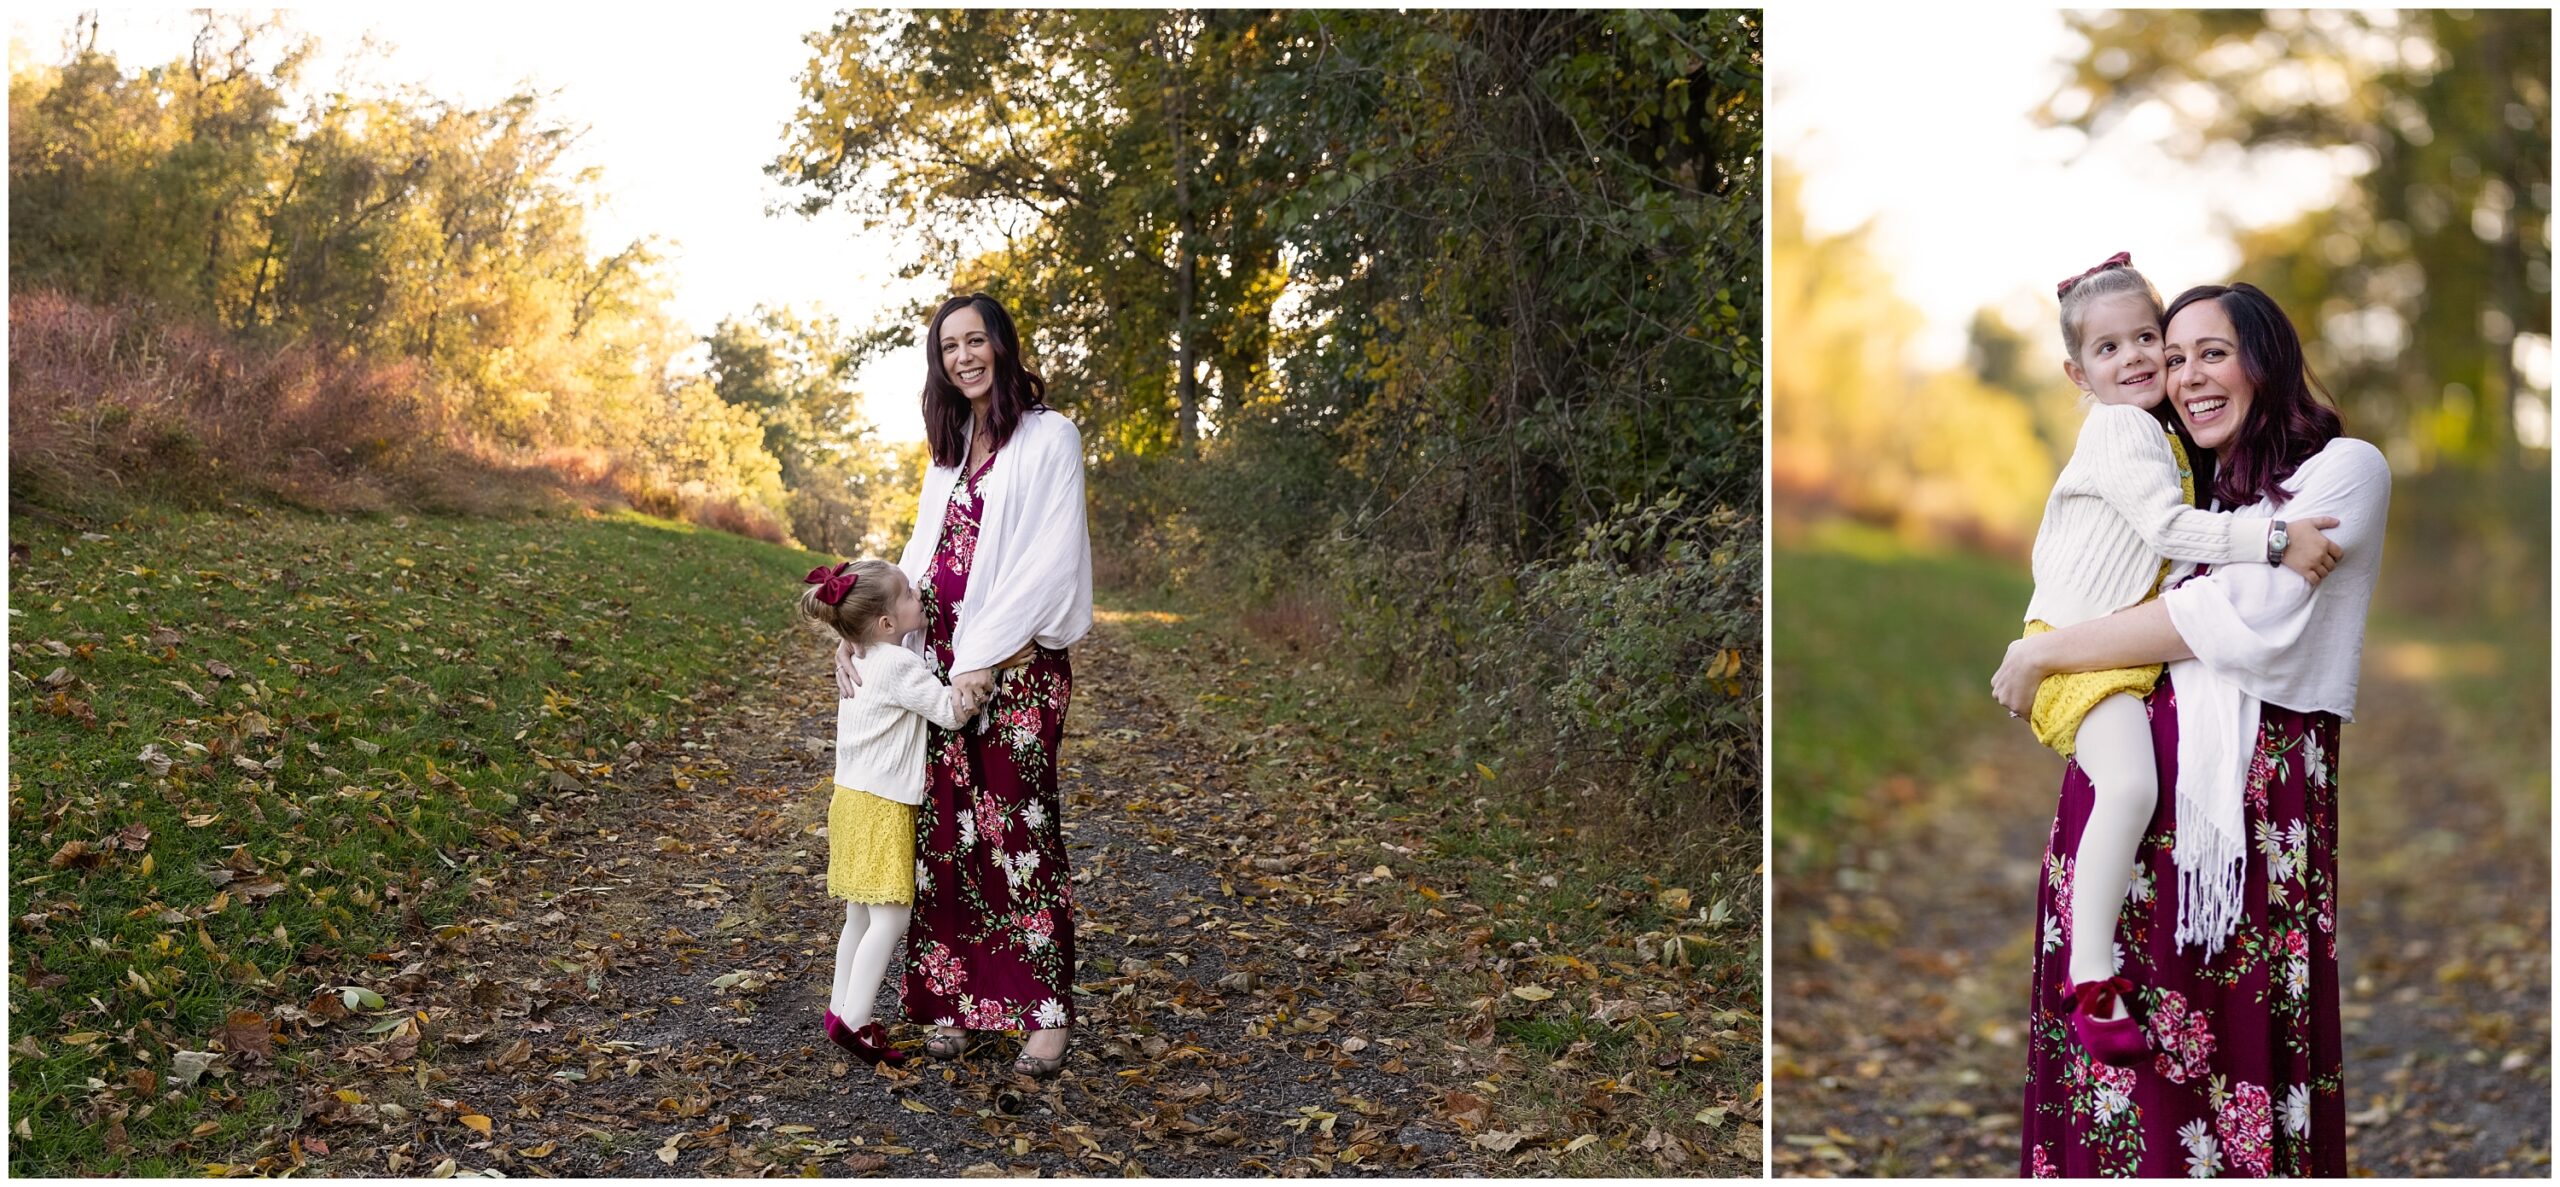 Fall Boyce Park Maternity Session in Plum PA Photographed by Plum and Pittsburgh Family & Maternity Photographer Acevedo Weddings